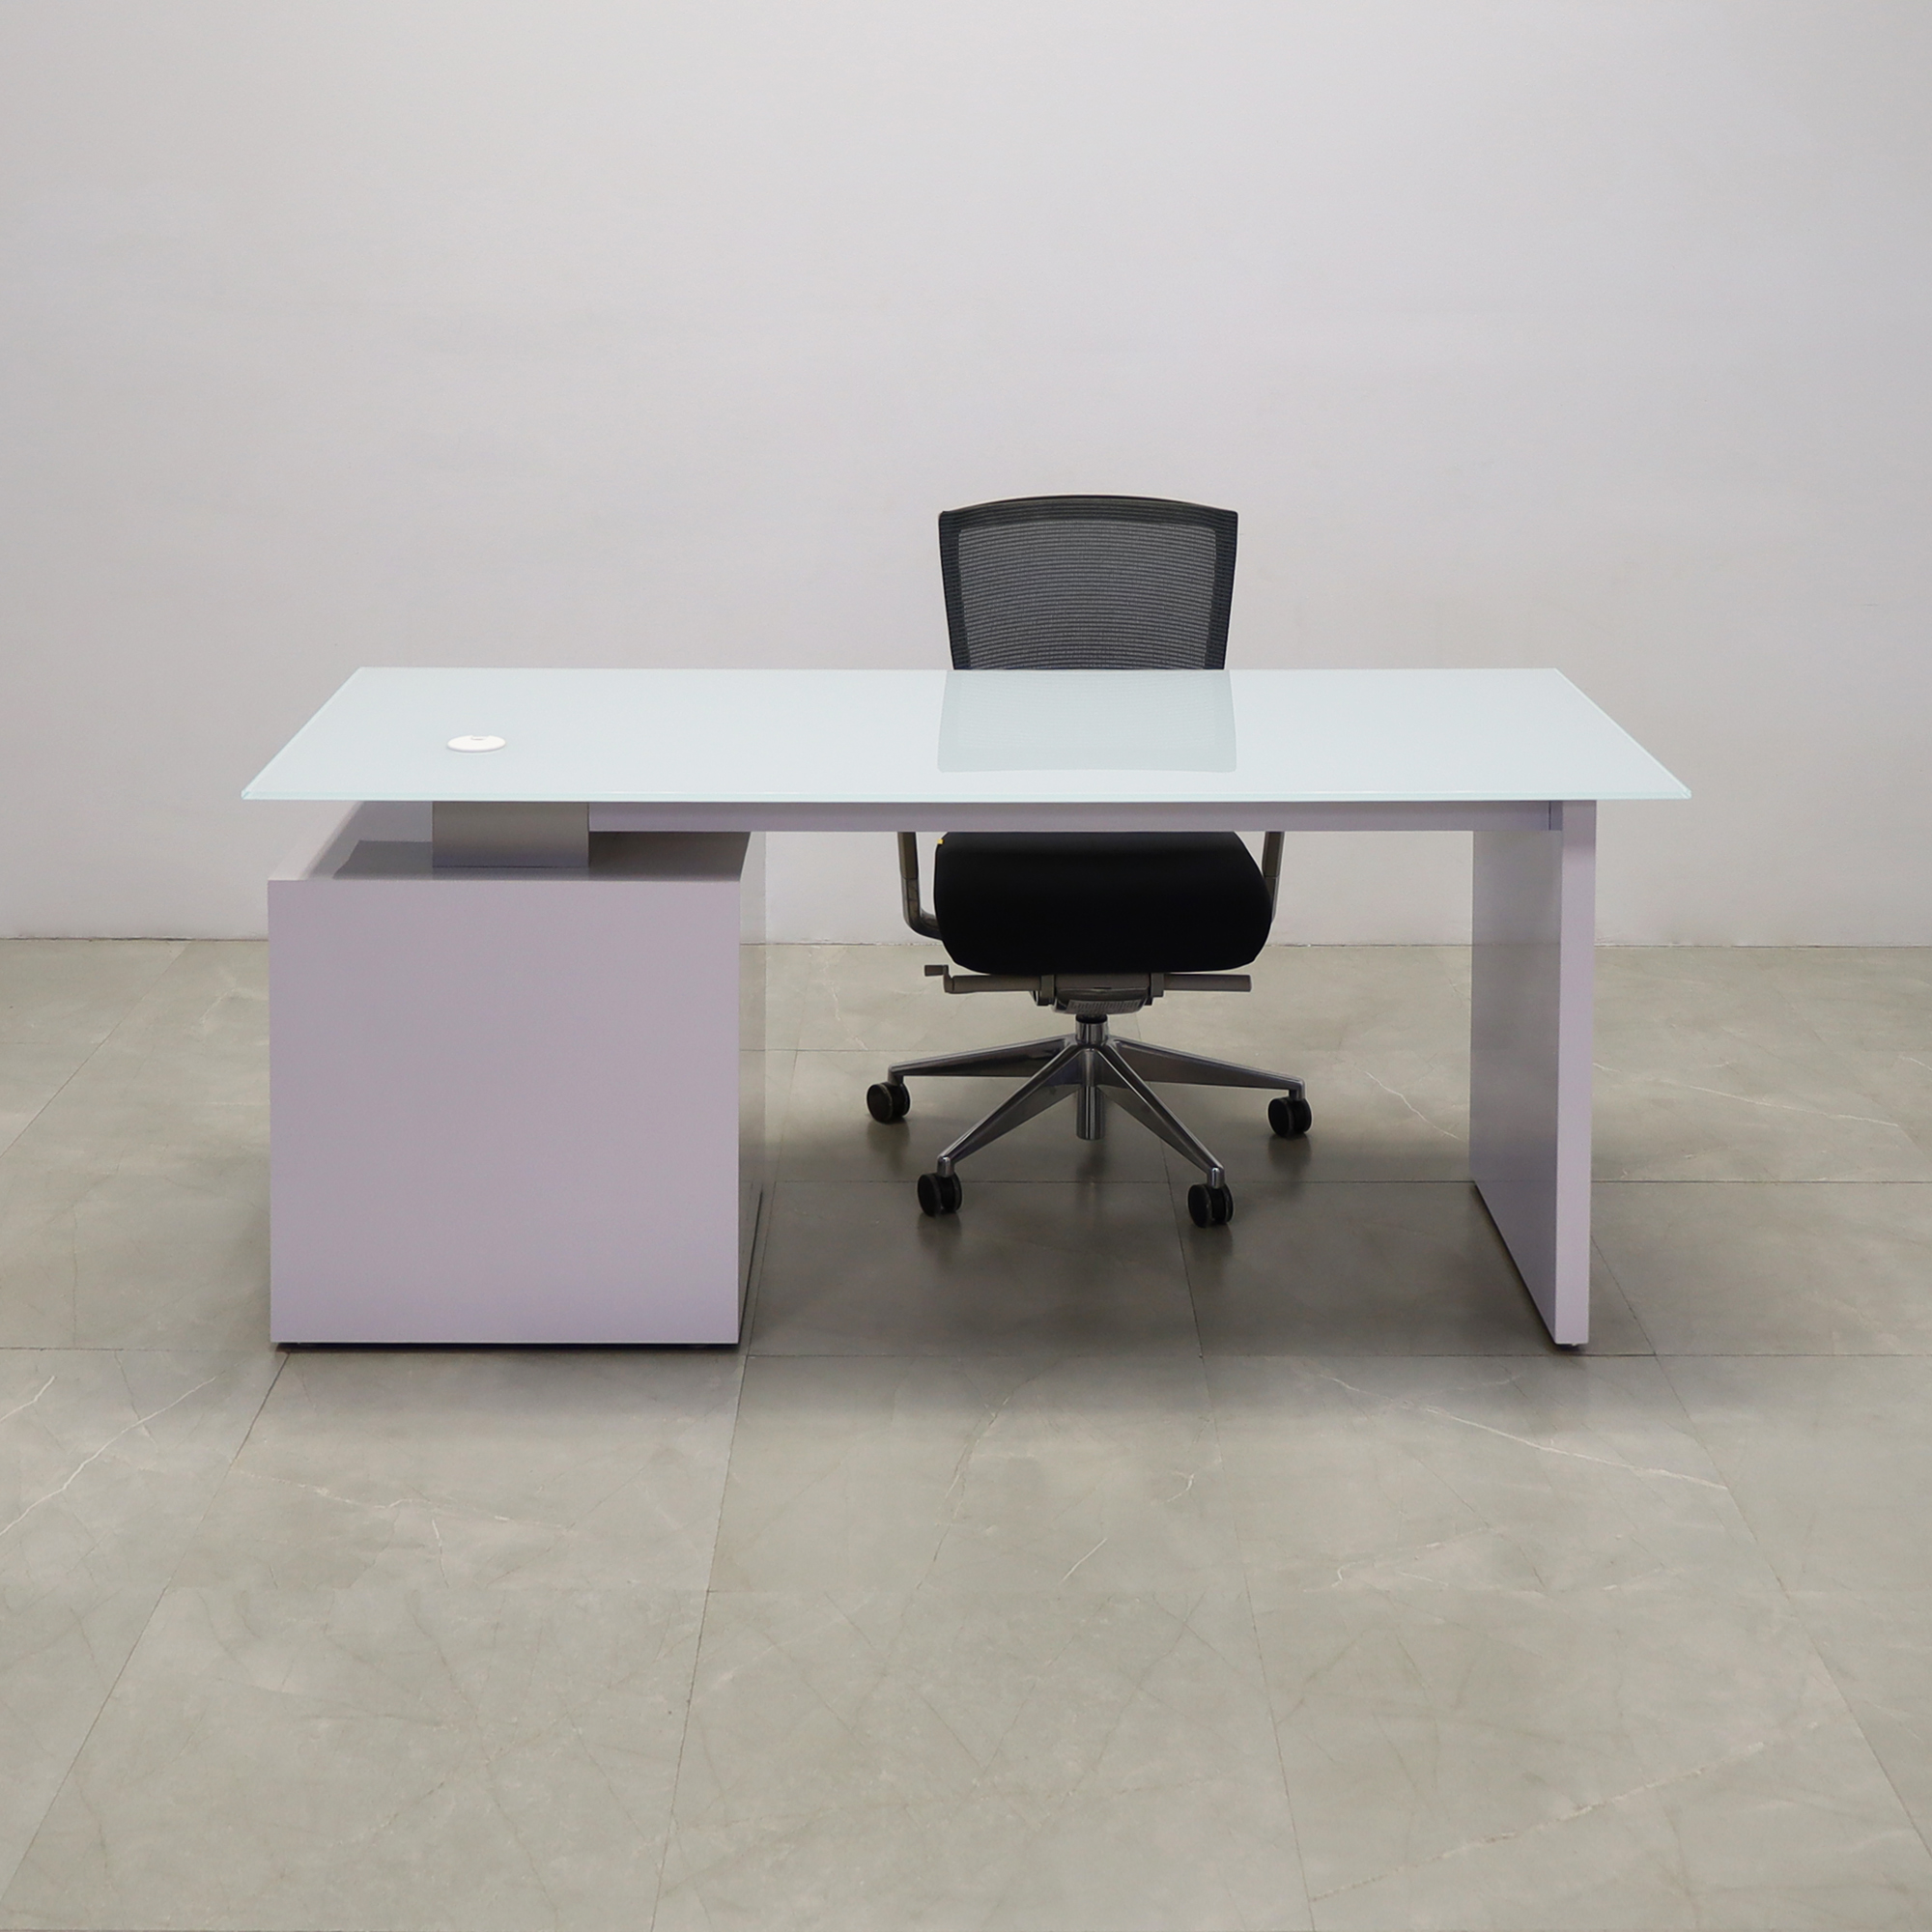 72 inches Avenue Straight Executive Desk In Tempered White Glass Top and white gloss laminate base and storage, with one black chair shown here.